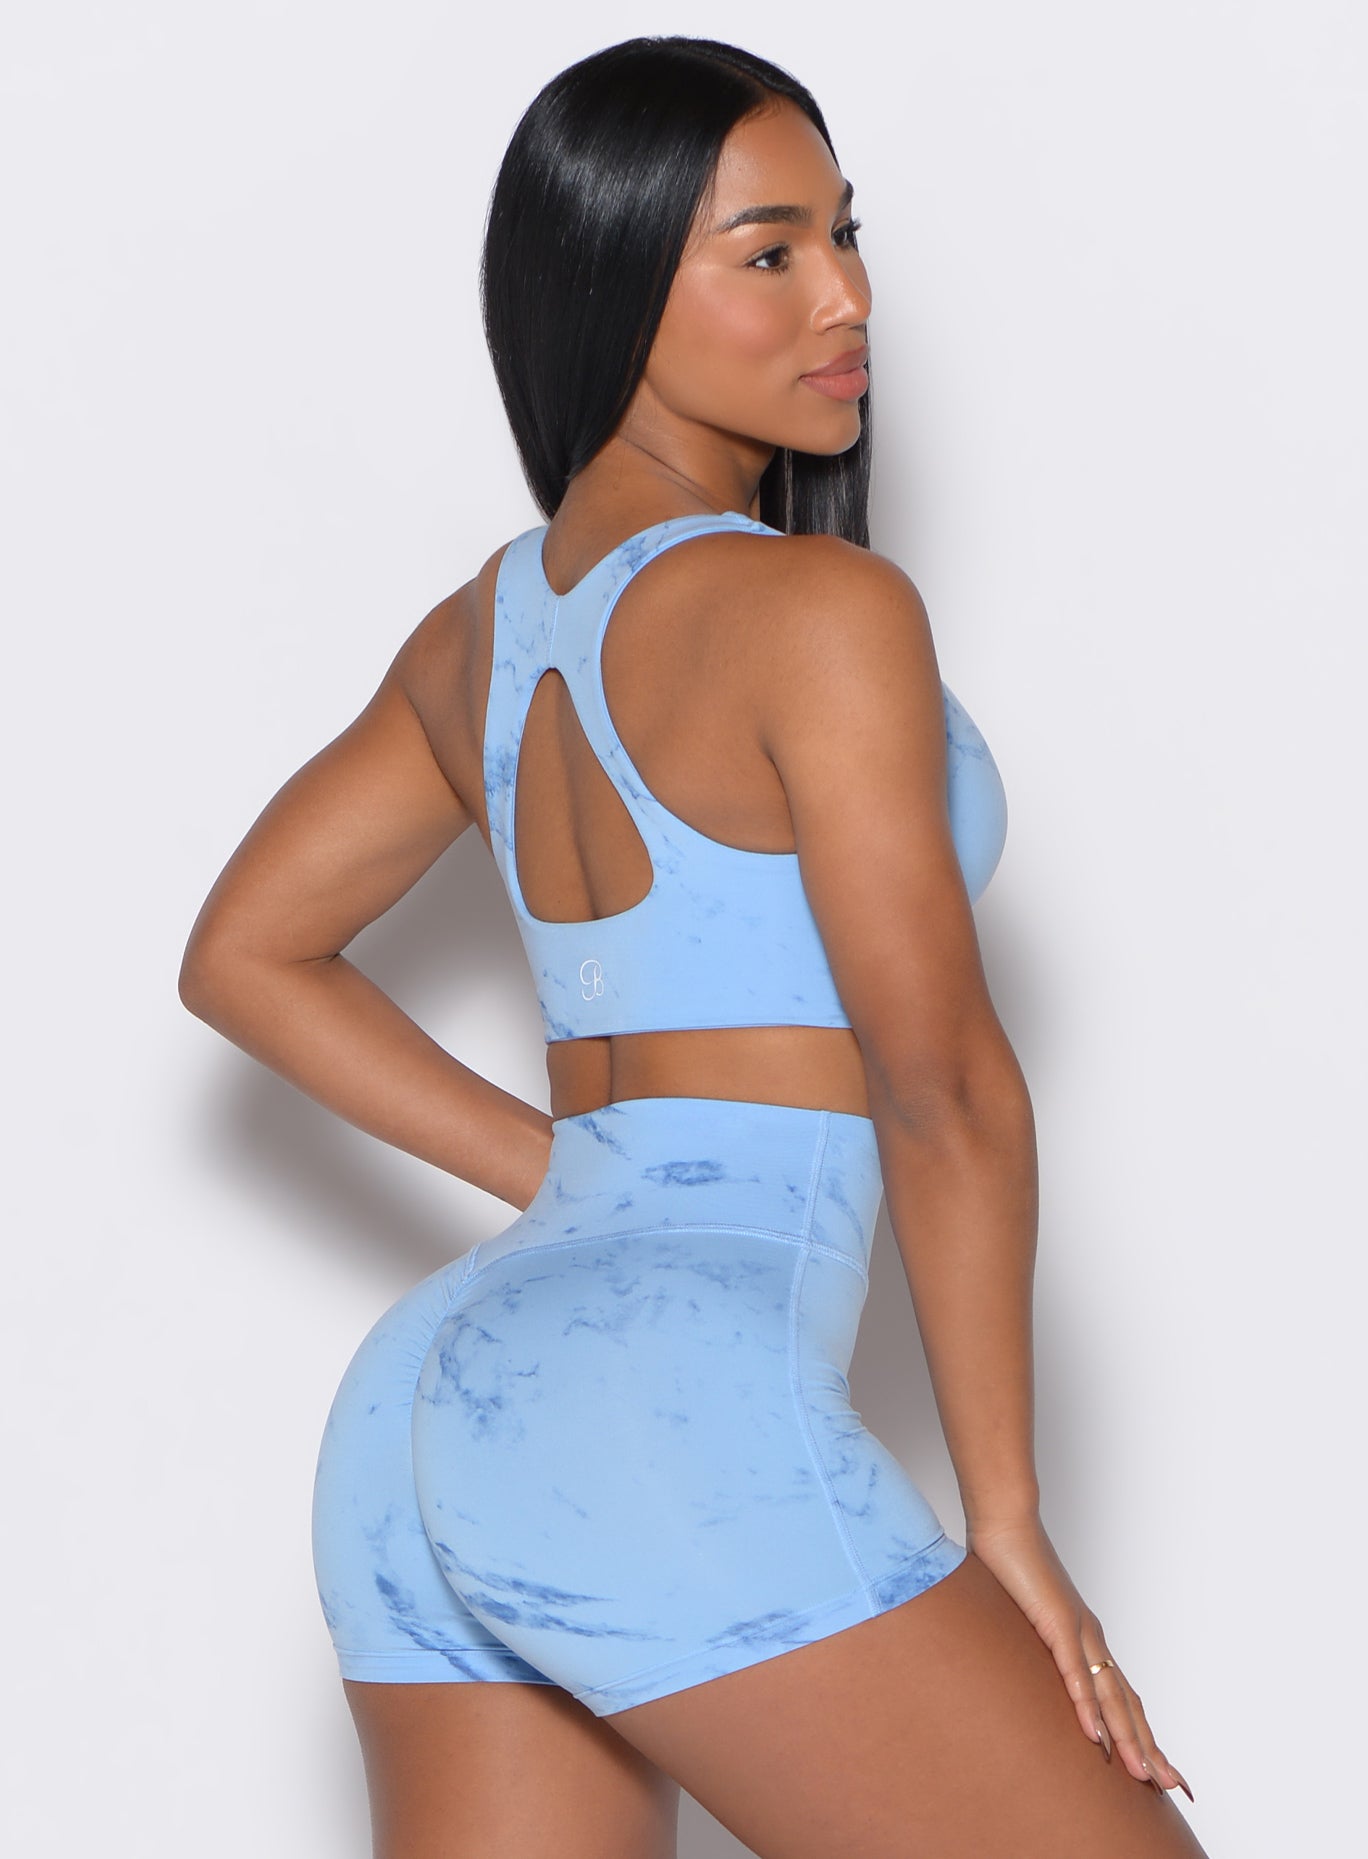 Back right side profile view of our model wearing the Square Neck Bra in Blue Jay color